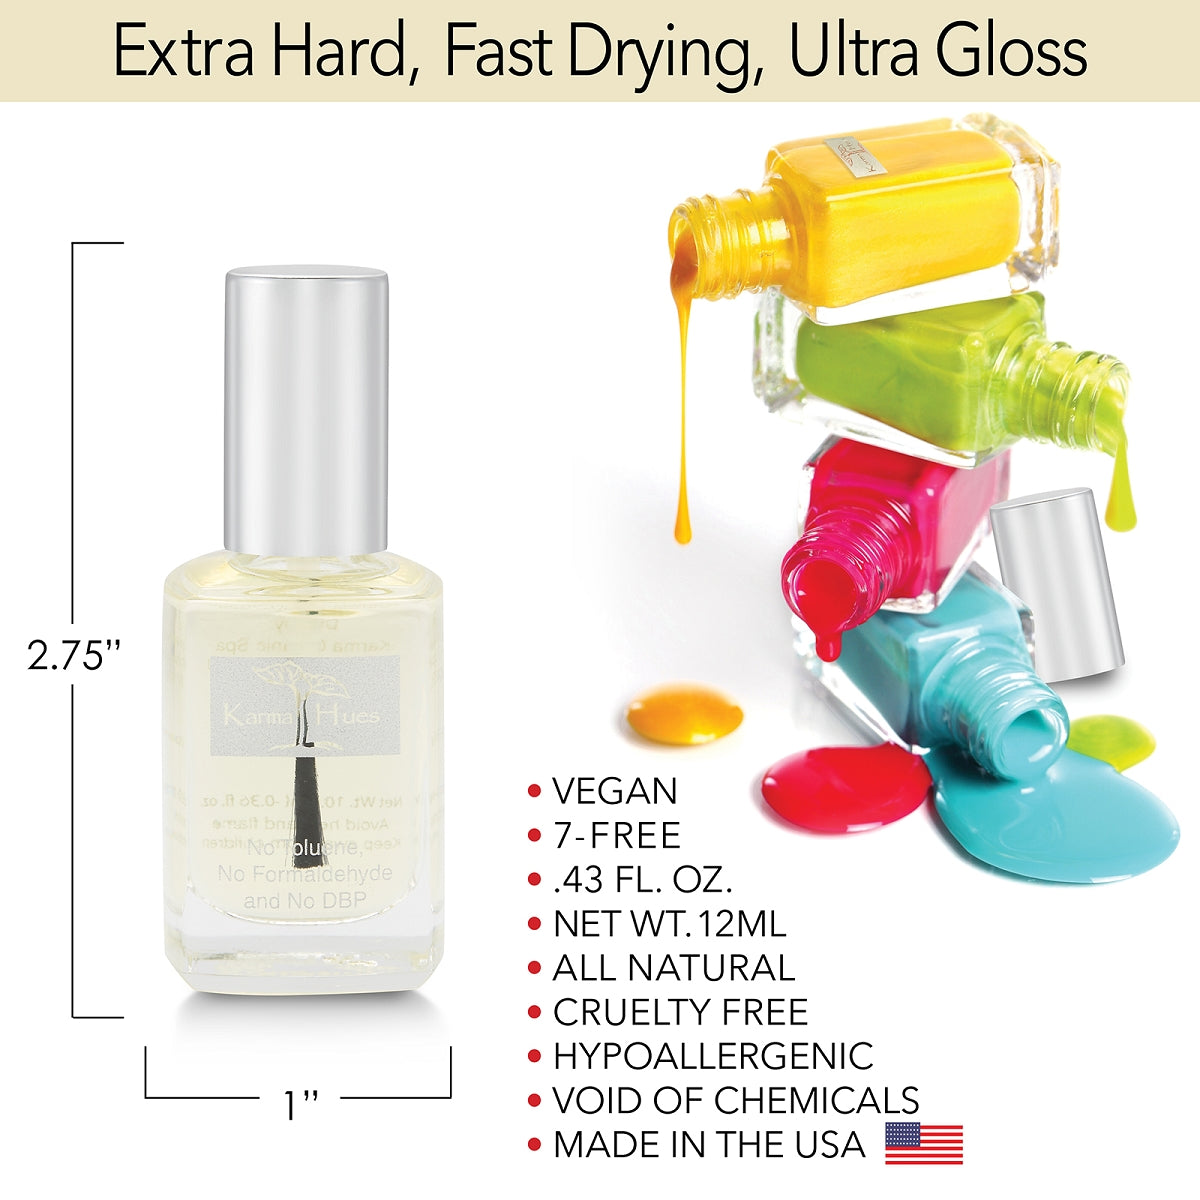 Avocado Cuticle Oil with Lavender - Nail Treatment; Non-Toxic, Vegan, and Cruelty-Free (#19628)